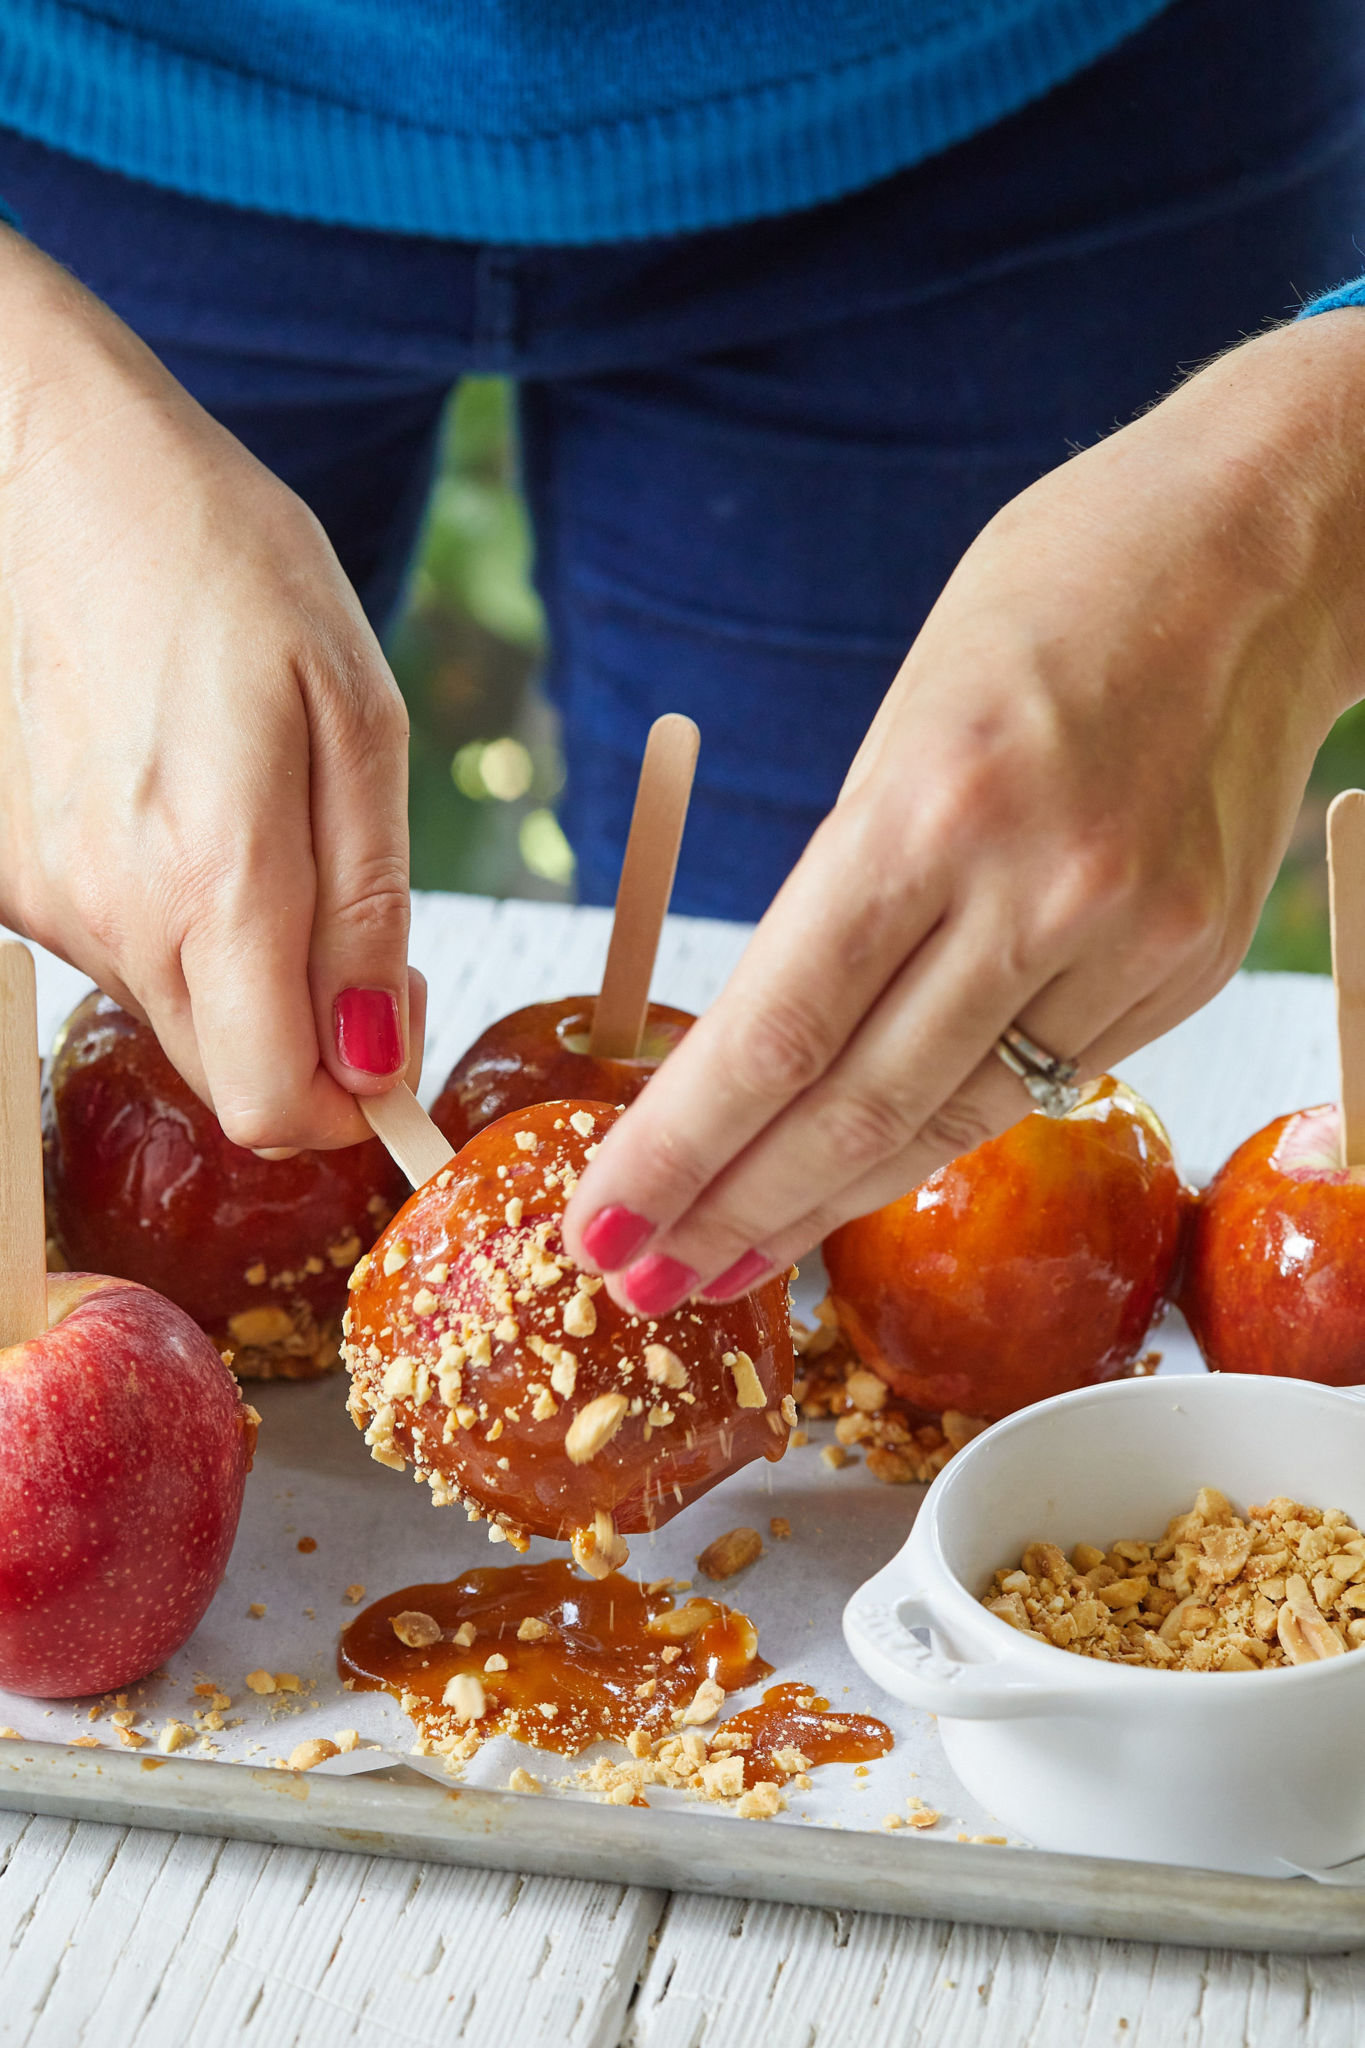 Gemma inserts a popsicle stick into a homemade caramel apple as she tops it with crushed peanuts.